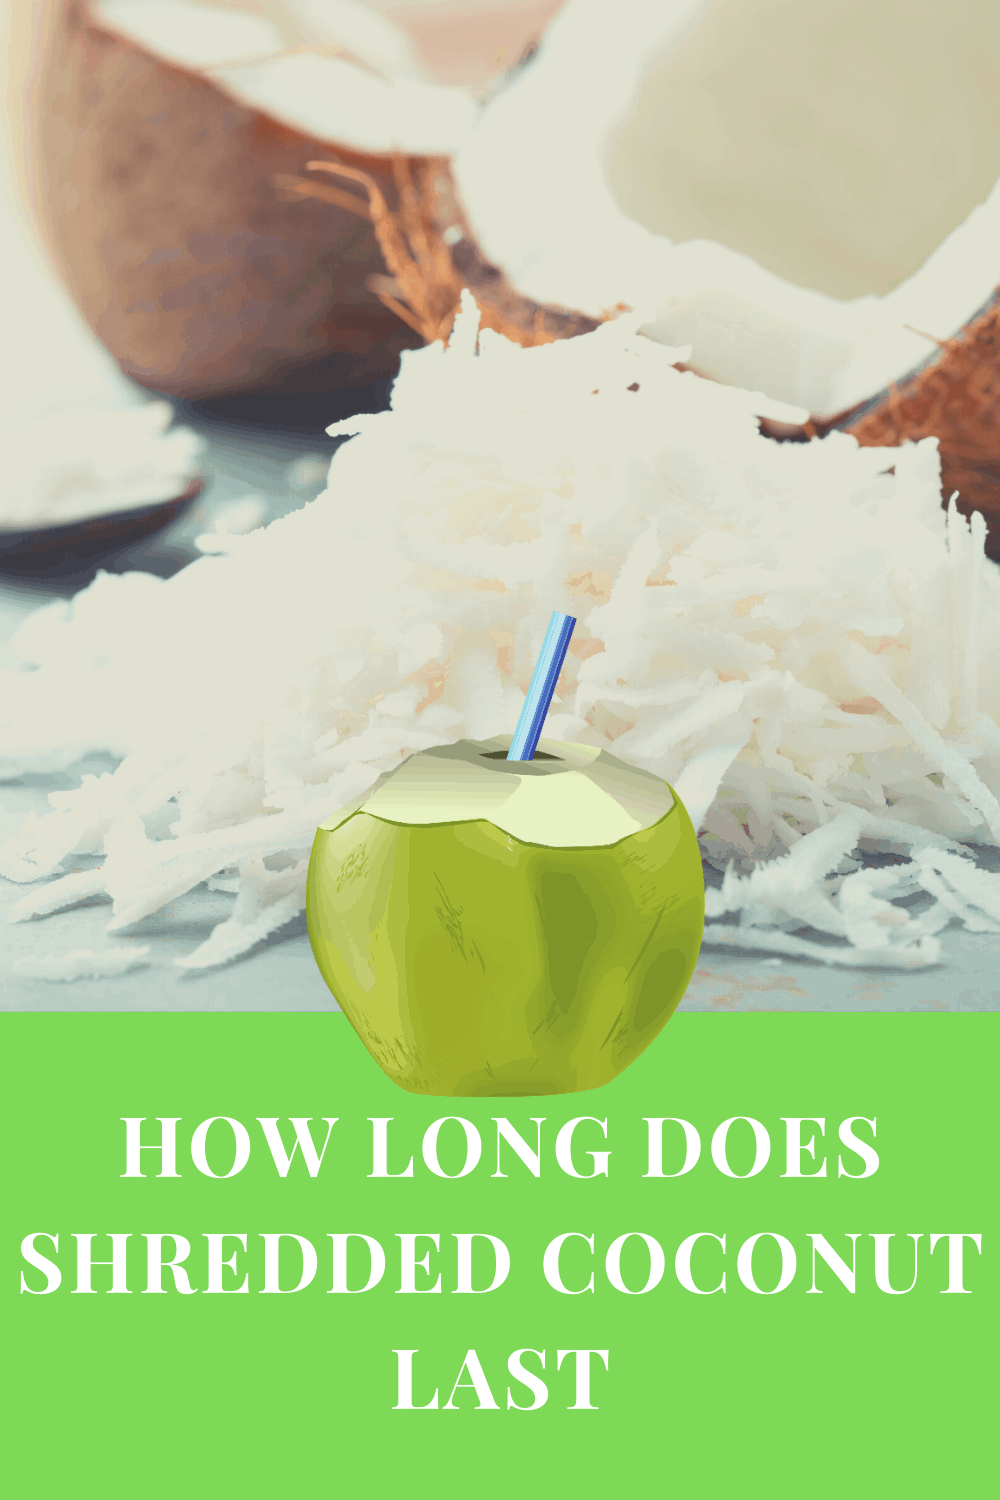 How Long Does Shredded Coconut Last